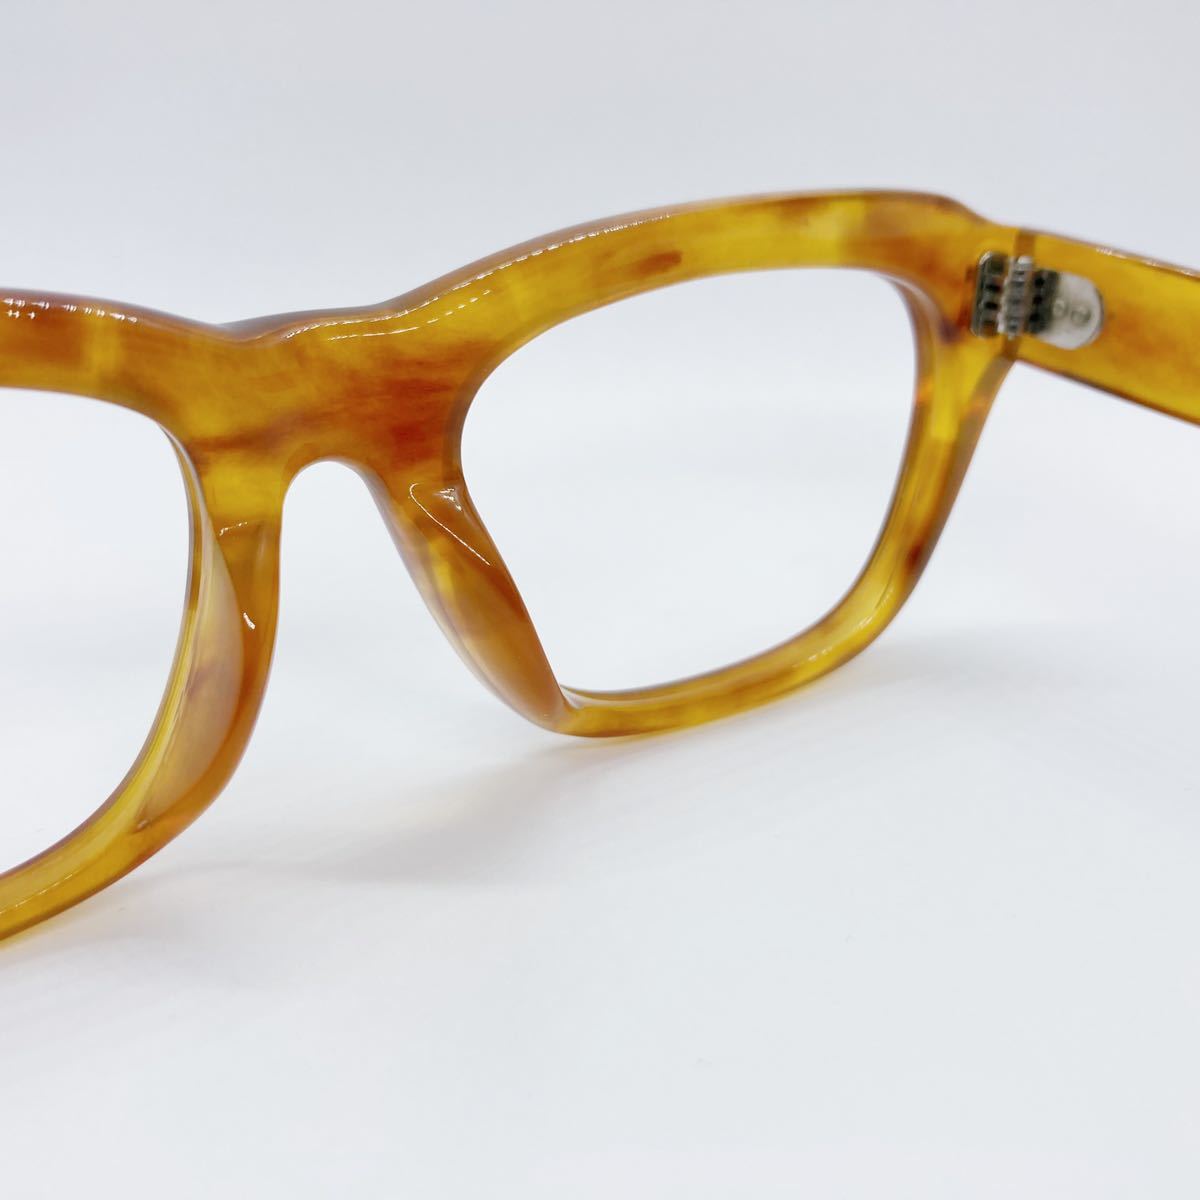 book@ tortoise shell 90 period glasses white ..we Lynn ton dead stock Vintage made in Japan domestic production Crown punt Vintage glasses frame France 18K